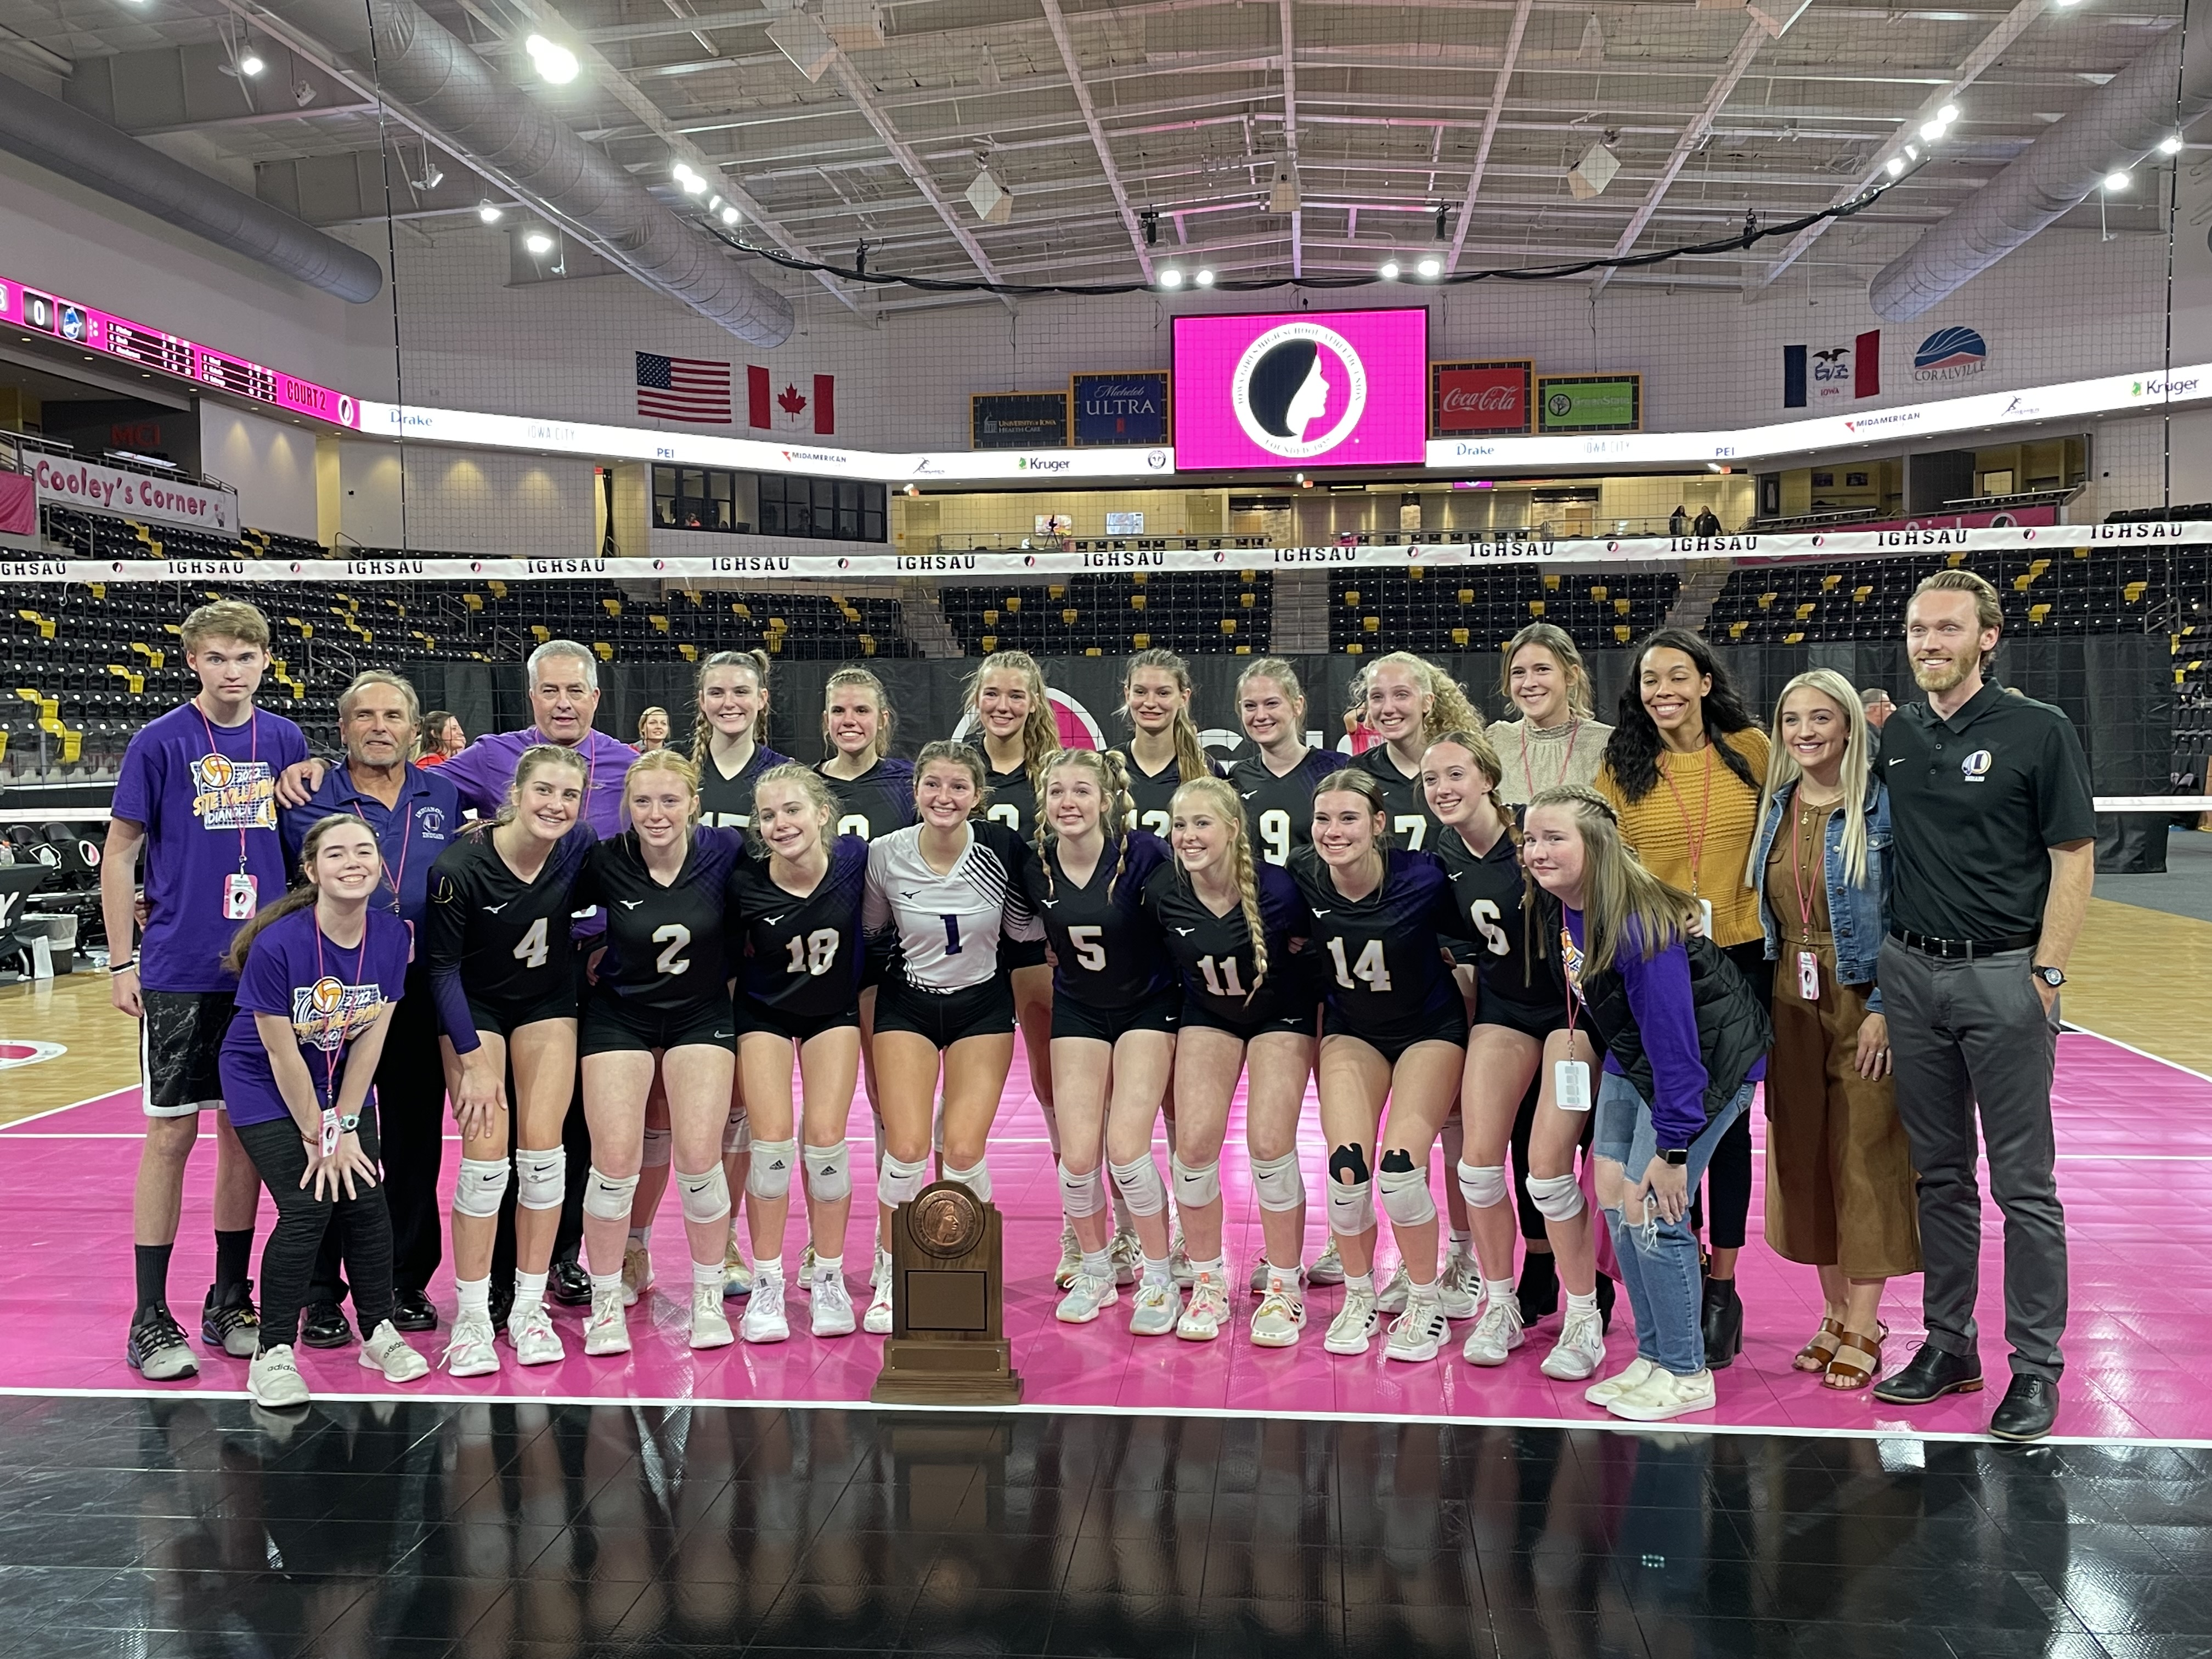 Indianola girls take separate routes to volleyball nationals